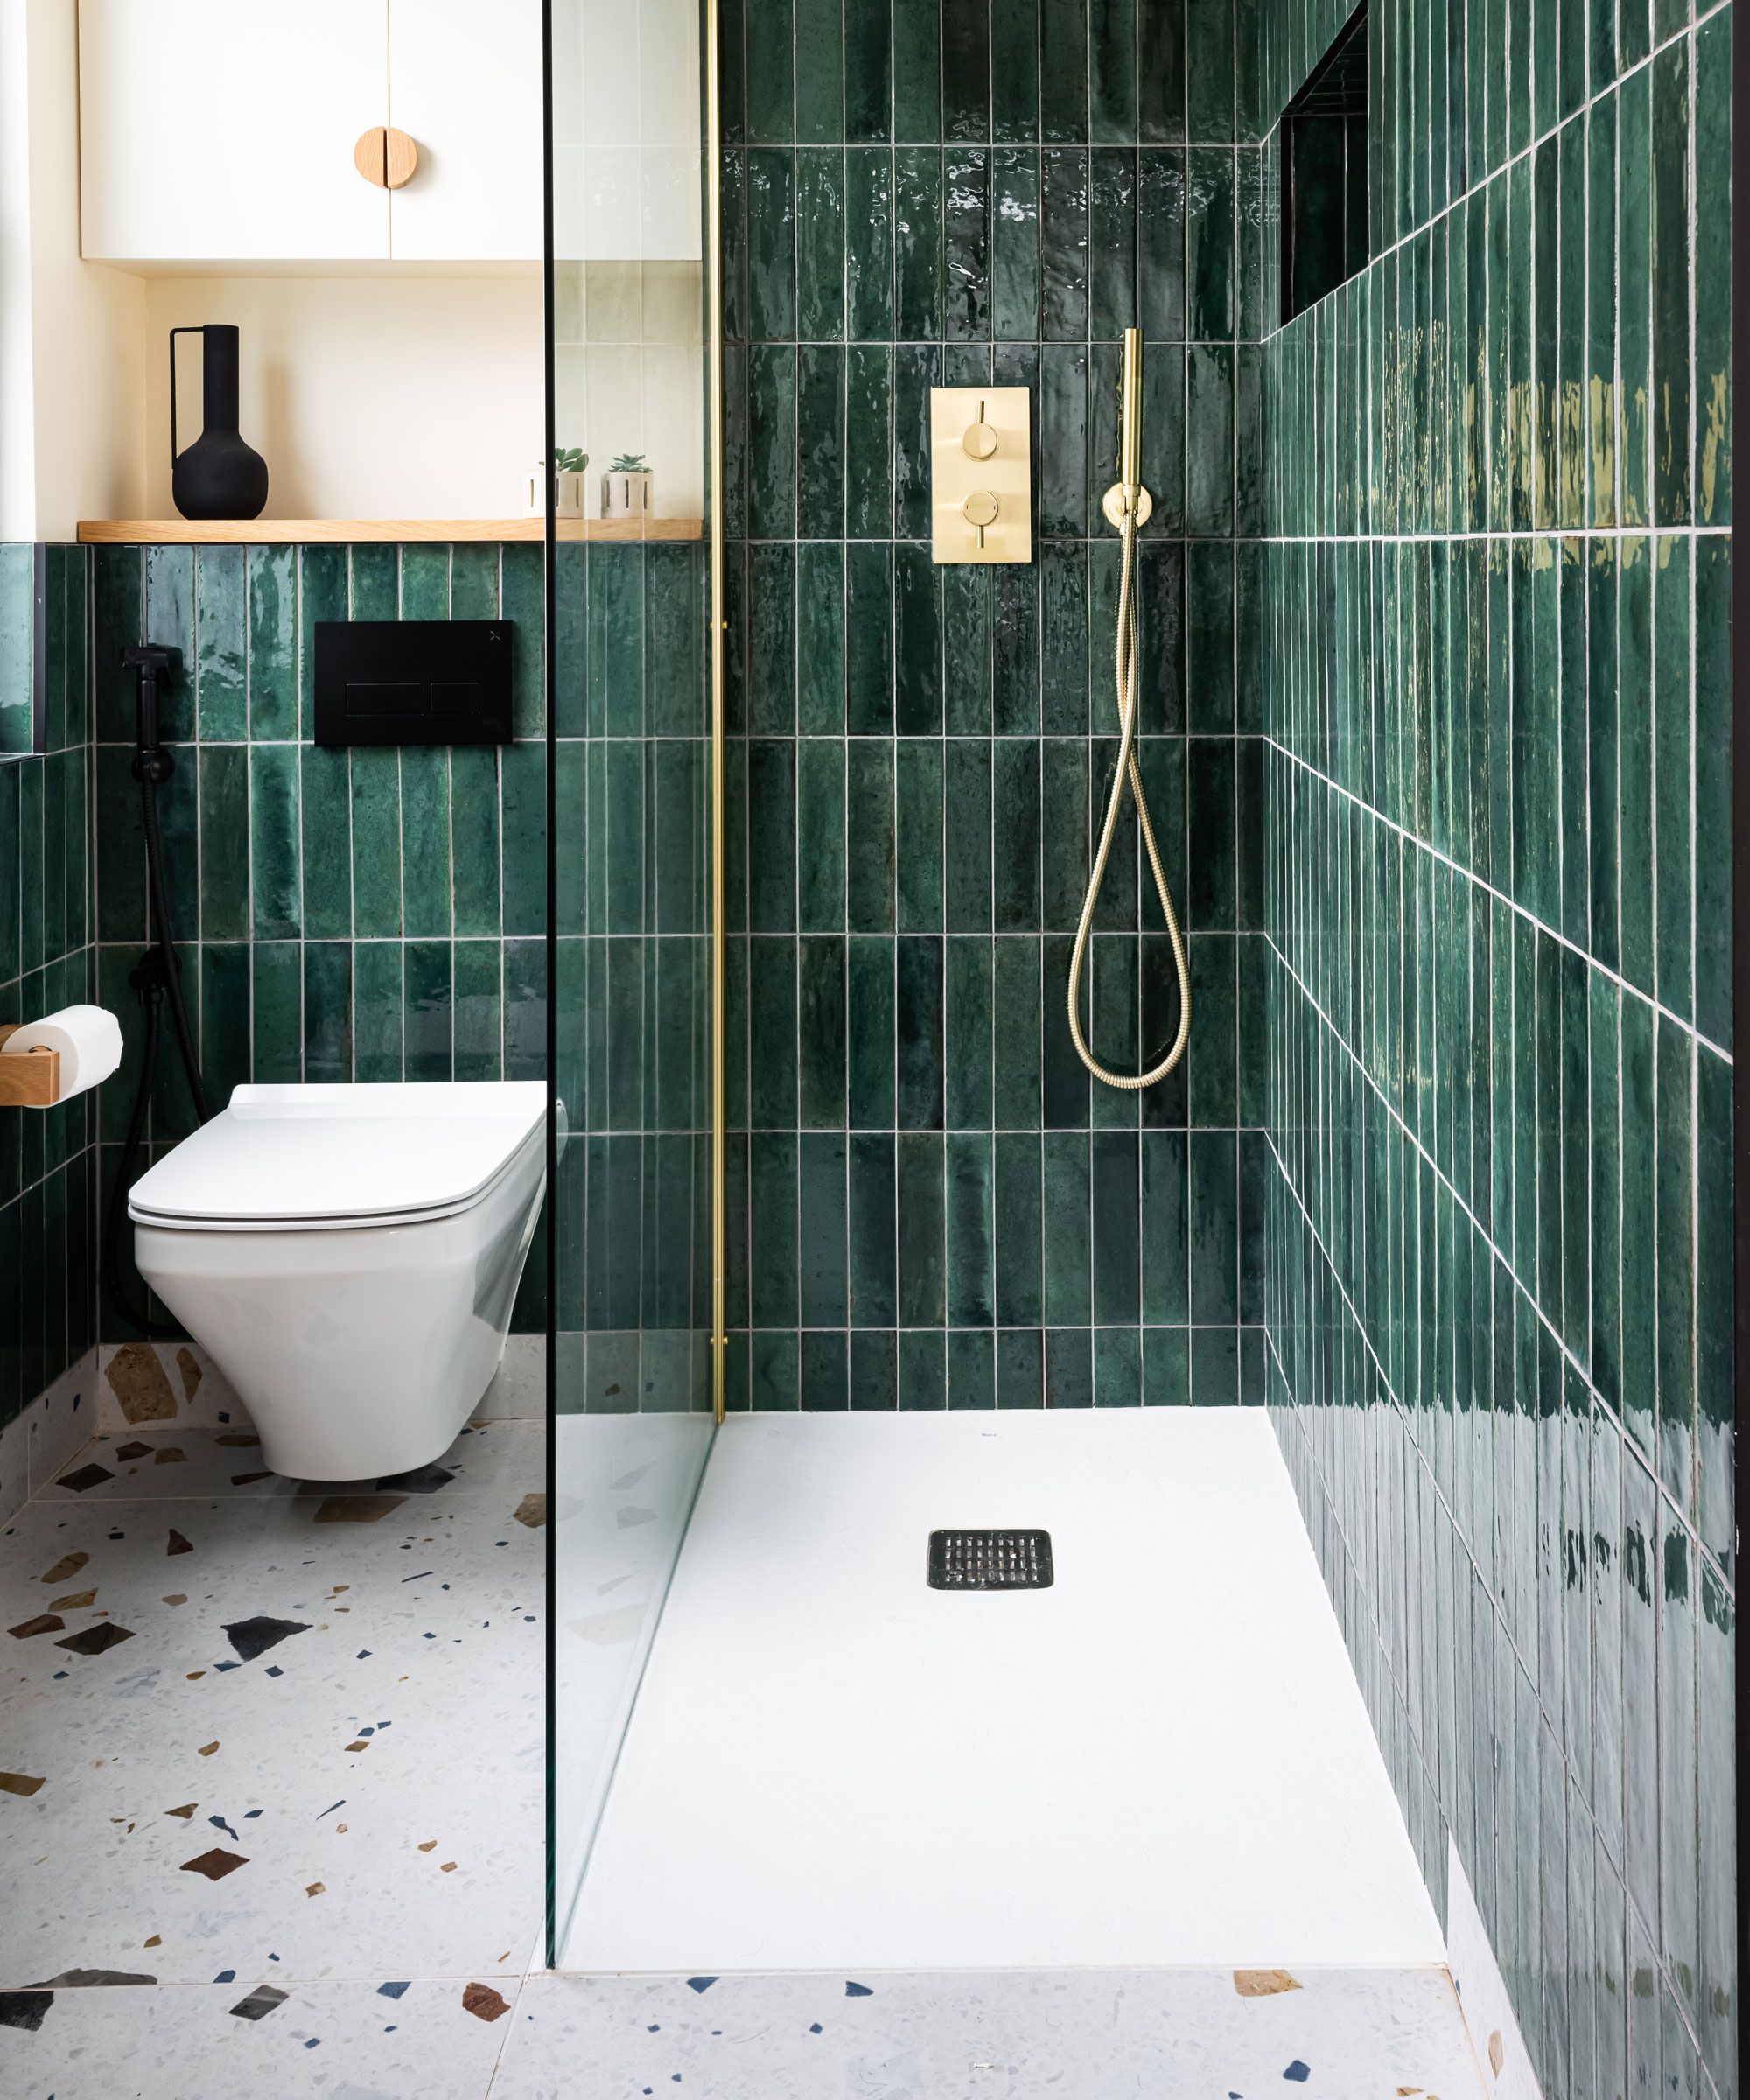 Getting the right bathroom tiling ideas